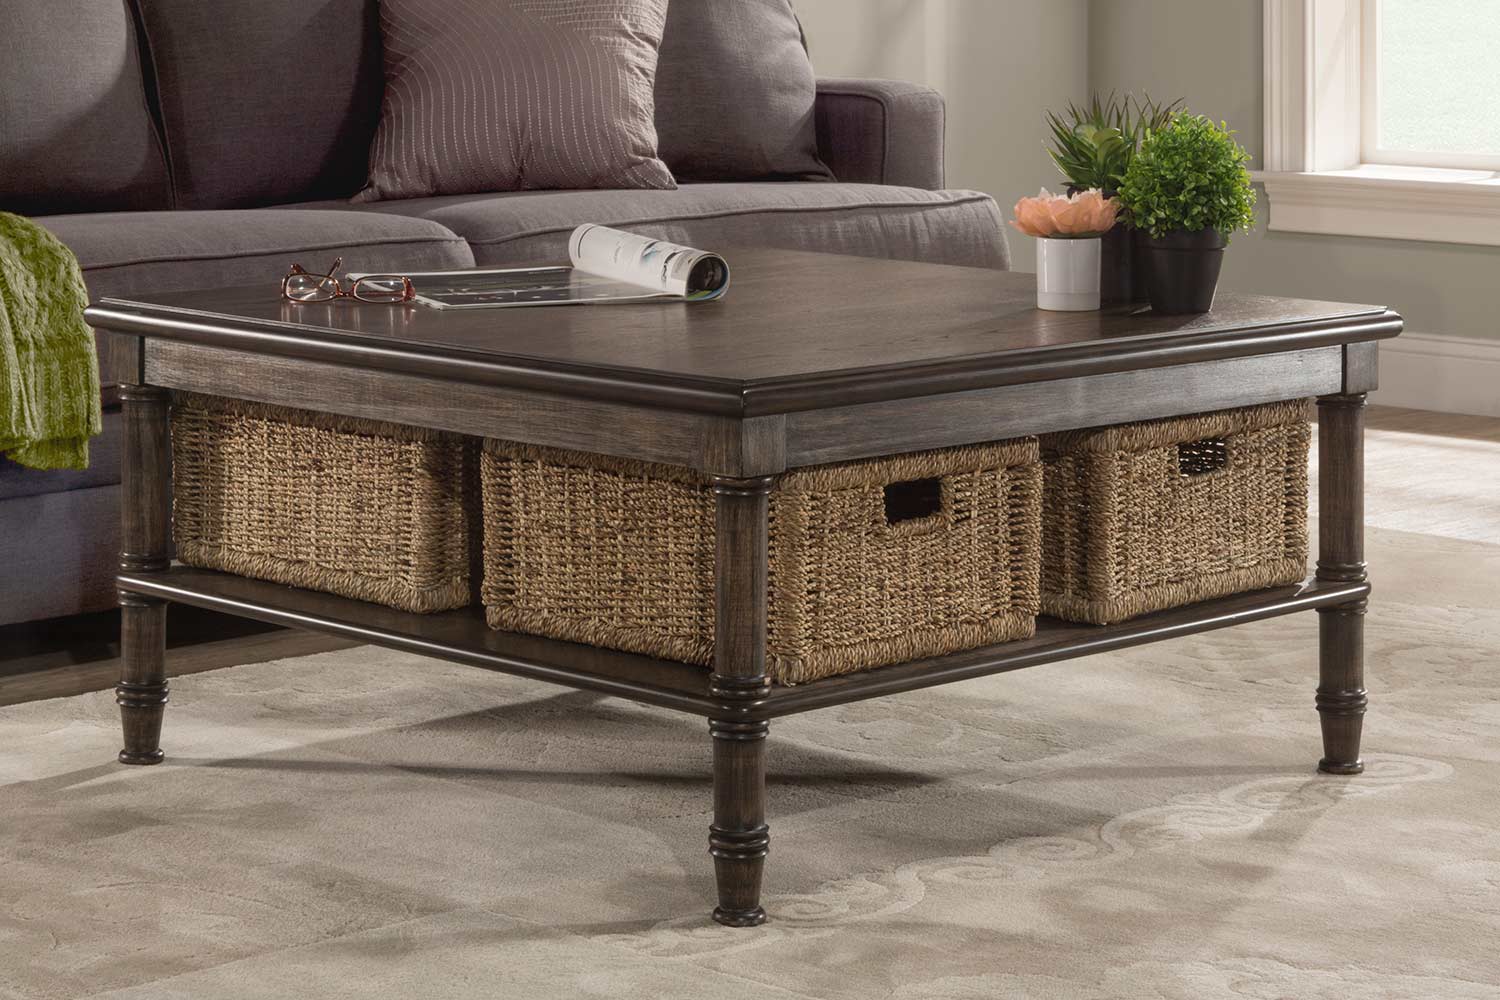 Hillsdale Seneca Coffee Table with 4 Baskets - Walnut/Natural Seagrass